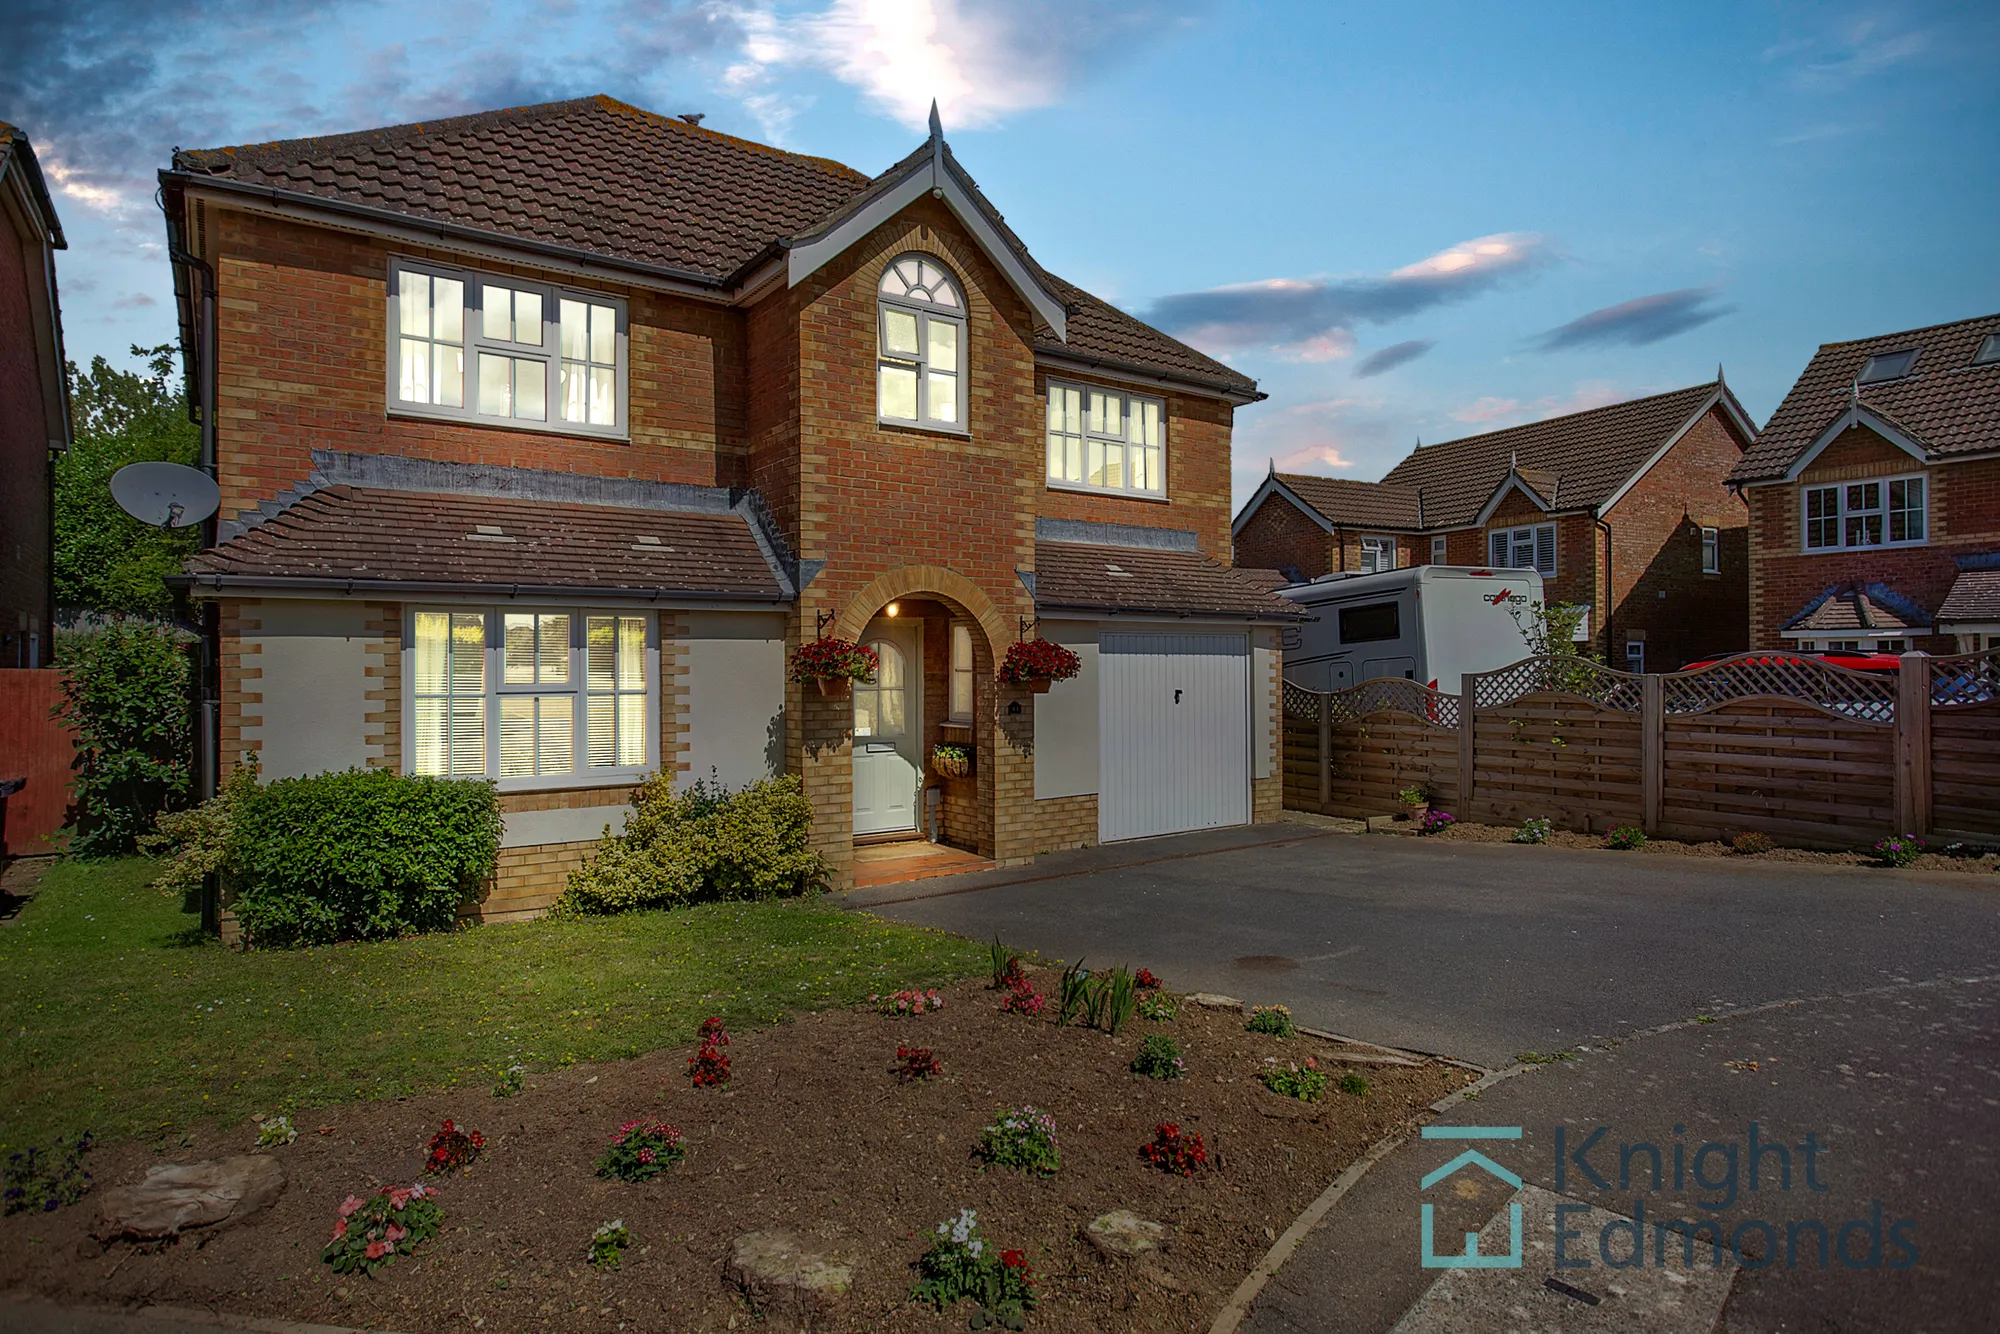 4 bed detached house for sale in Firmin Avenue, Maidstone - Property Image 1